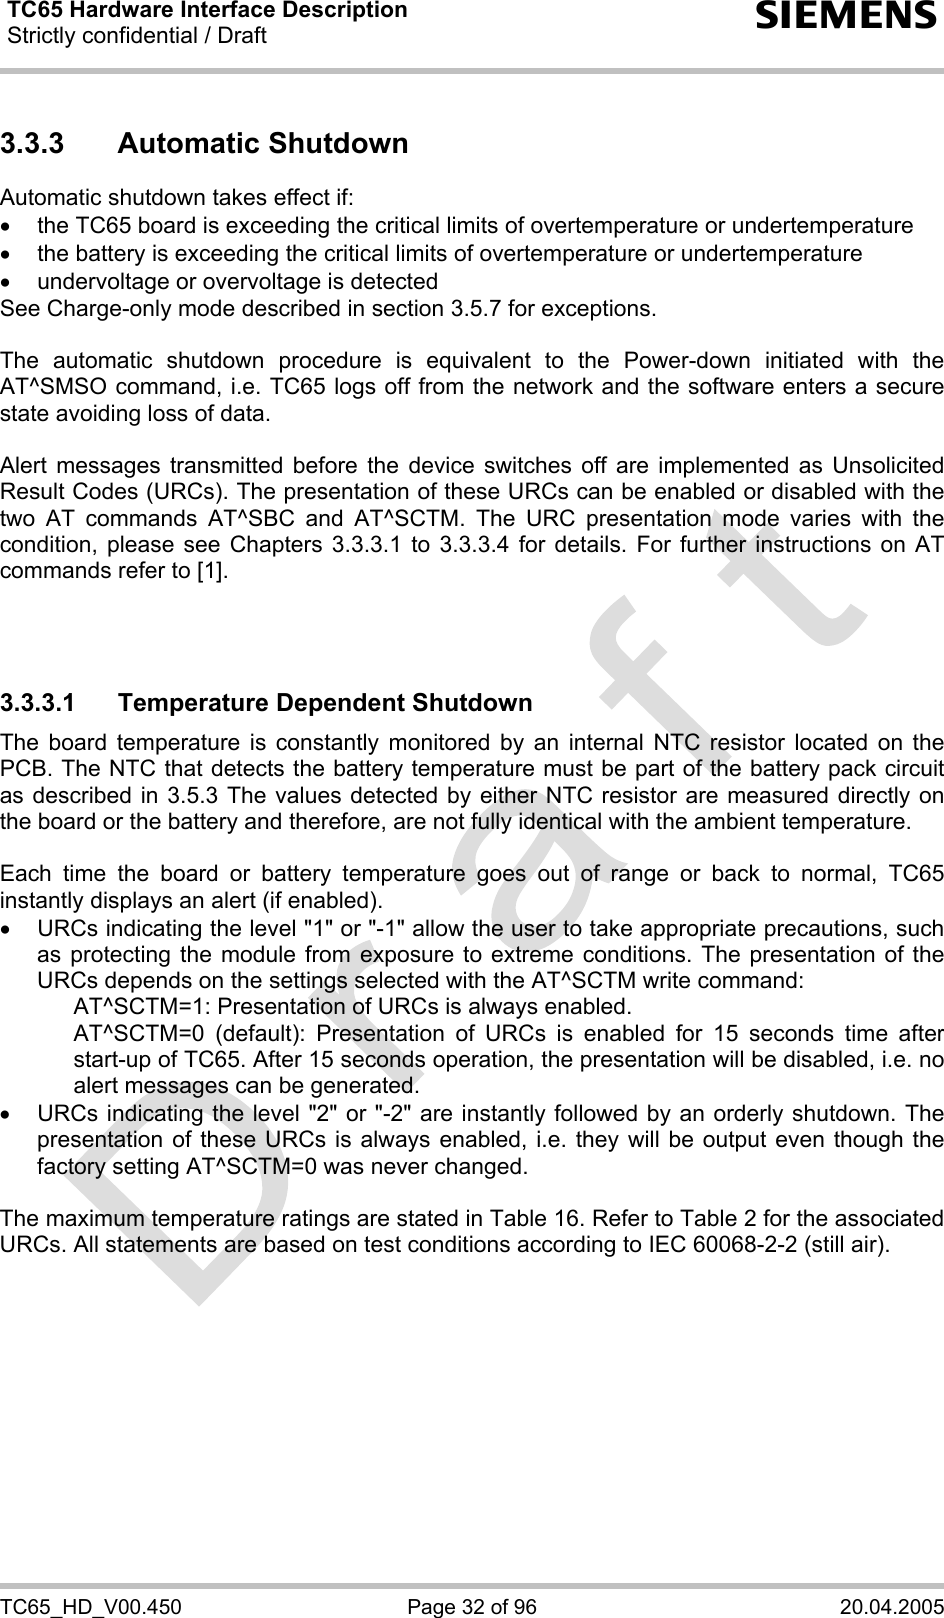 TC65 Hardware Interface Description Strictly confidential / Draft  s TC65_HD_V00.450  Page 32 of 96  20.04.2005 3.3.3 Automatic Shutdown Automatic shutdown takes effect if: •  the TC65 board is exceeding the critical limits of overtemperature or undertemperature •  the battery is exceeding the critical limits of overtemperature or undertemperature •  undervoltage or overvoltage is detected See Charge-only mode described in section 3.5.7 for exceptions.   The automatic shutdown procedure is equivalent to the Power-down initiated with the AT^SMSO command, i.e. TC65 logs off from the network and the software enters a secure state avoiding loss of data.   Alert messages transmitted before the device switches off are implemented as Unsolicited Result Codes (URCs). The presentation of these URCs can be enabled or disabled with the two AT commands AT^SBC and AT^SCTM. The URC presentation mode varies with the condition, please see Chapters 3.3.3.1 to 3.3.3.4 for details. For further instructions on AT commands refer to [1].    3.3.3.1  Temperature Dependent Shutdown The board temperature is constantly monitored by an internal NTC resistor located on the PCB. The NTC that detects the battery temperature must be part of the battery pack circuit as described in 3.5.3 The values detected by either NTC resistor are measured directly on the board or the battery and therefore, are not fully identical with the ambient temperature.   Each time the board or battery temperature goes out of range or back to normal, TC65 instantly displays an alert (if enabled). •  URCs indicating the level &quot;1&quot; or &quot;-1&quot; allow the user to take appropriate precautions, such as protecting the module from exposure to extreme conditions. The presentation of the URCs depends on the settings selected with the AT^SCTM write command:     AT^SCTM=1: Presentation of URCs is always enabled.      AT^SCTM=0 (default): Presentation of URCs is enabled for 15 seconds time after start-up of TC65. After 15 seconds operation, the presentation will be disabled, i.e. no alert messages can be generated.  •  URCs indicating the level &quot;2&quot; or &quot;-2&quot; are instantly followed by an orderly shutdown. The presentation of these URCs is always enabled, i.e. they will be output even though the factory setting AT^SCTM=0 was never changed.  The maximum temperature ratings are stated in Table 16. Refer to Table 2 for the associated URCs. All statements are based on test conditions according to IEC 60068-2-2 (still air).  